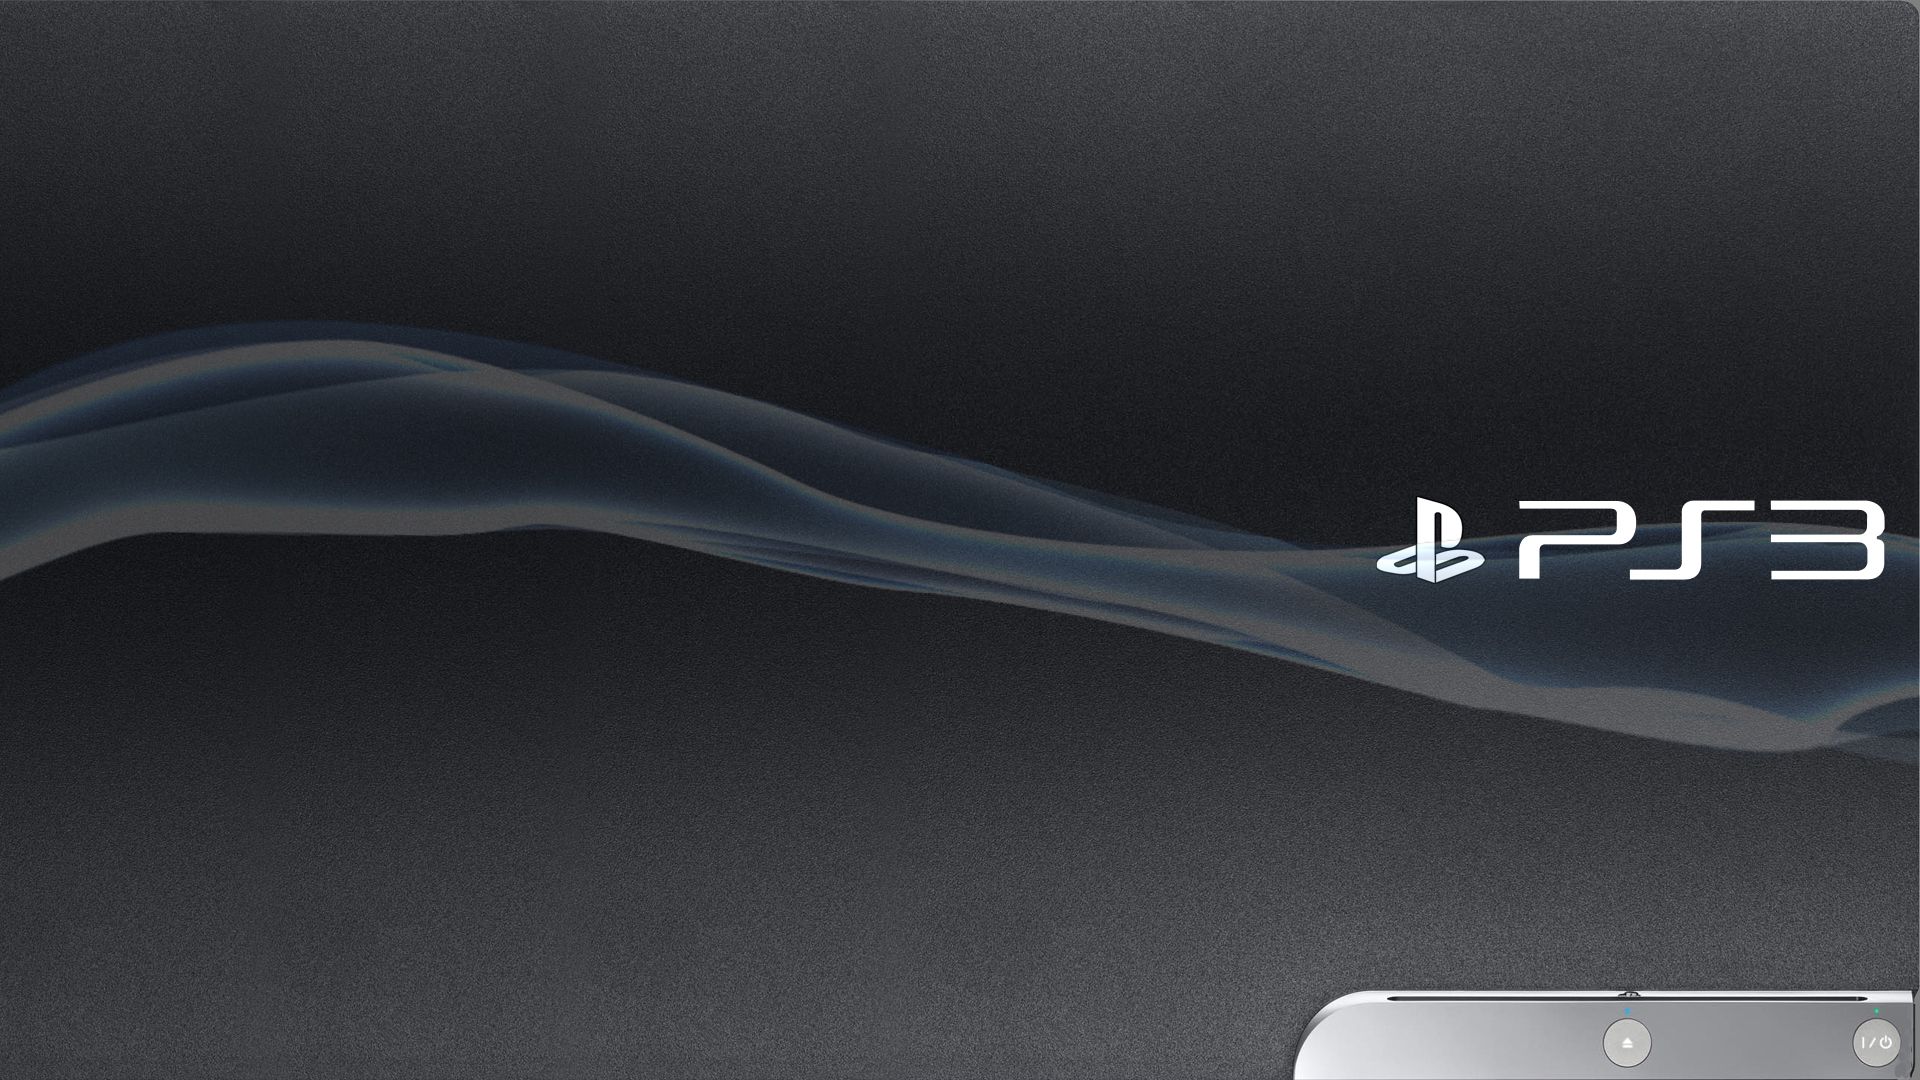 PS3 Wallpapers on WallpaperDog